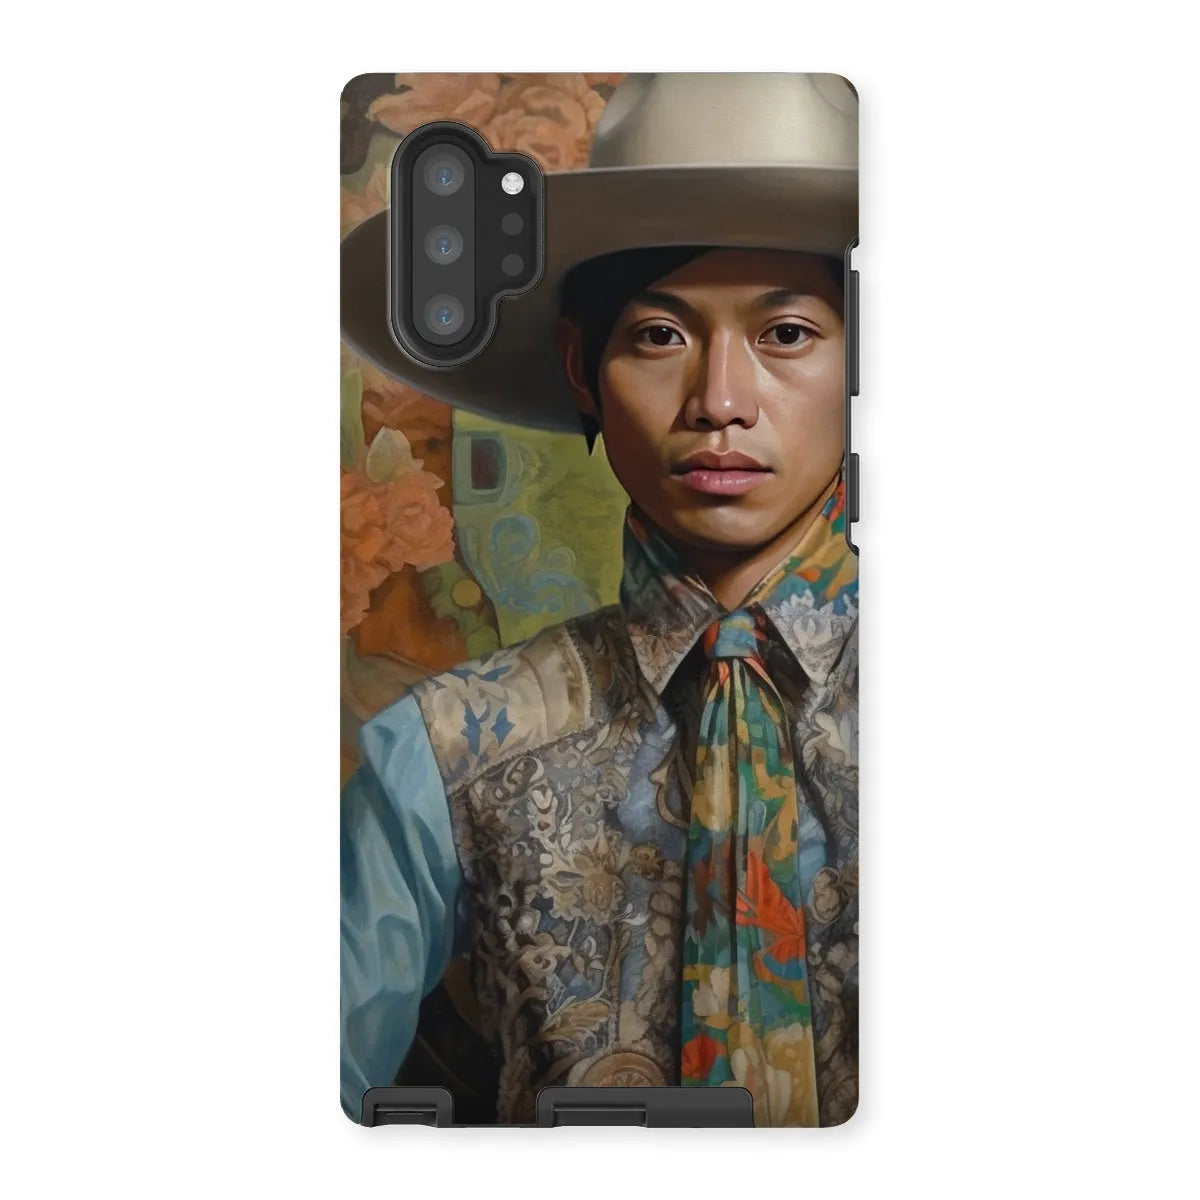 Junada The Gay Cowboy - Dandy Gay Aesthetic Art Phone Case - Samsung Galaxy Note 10p / Matte - Mobile Phone Cases